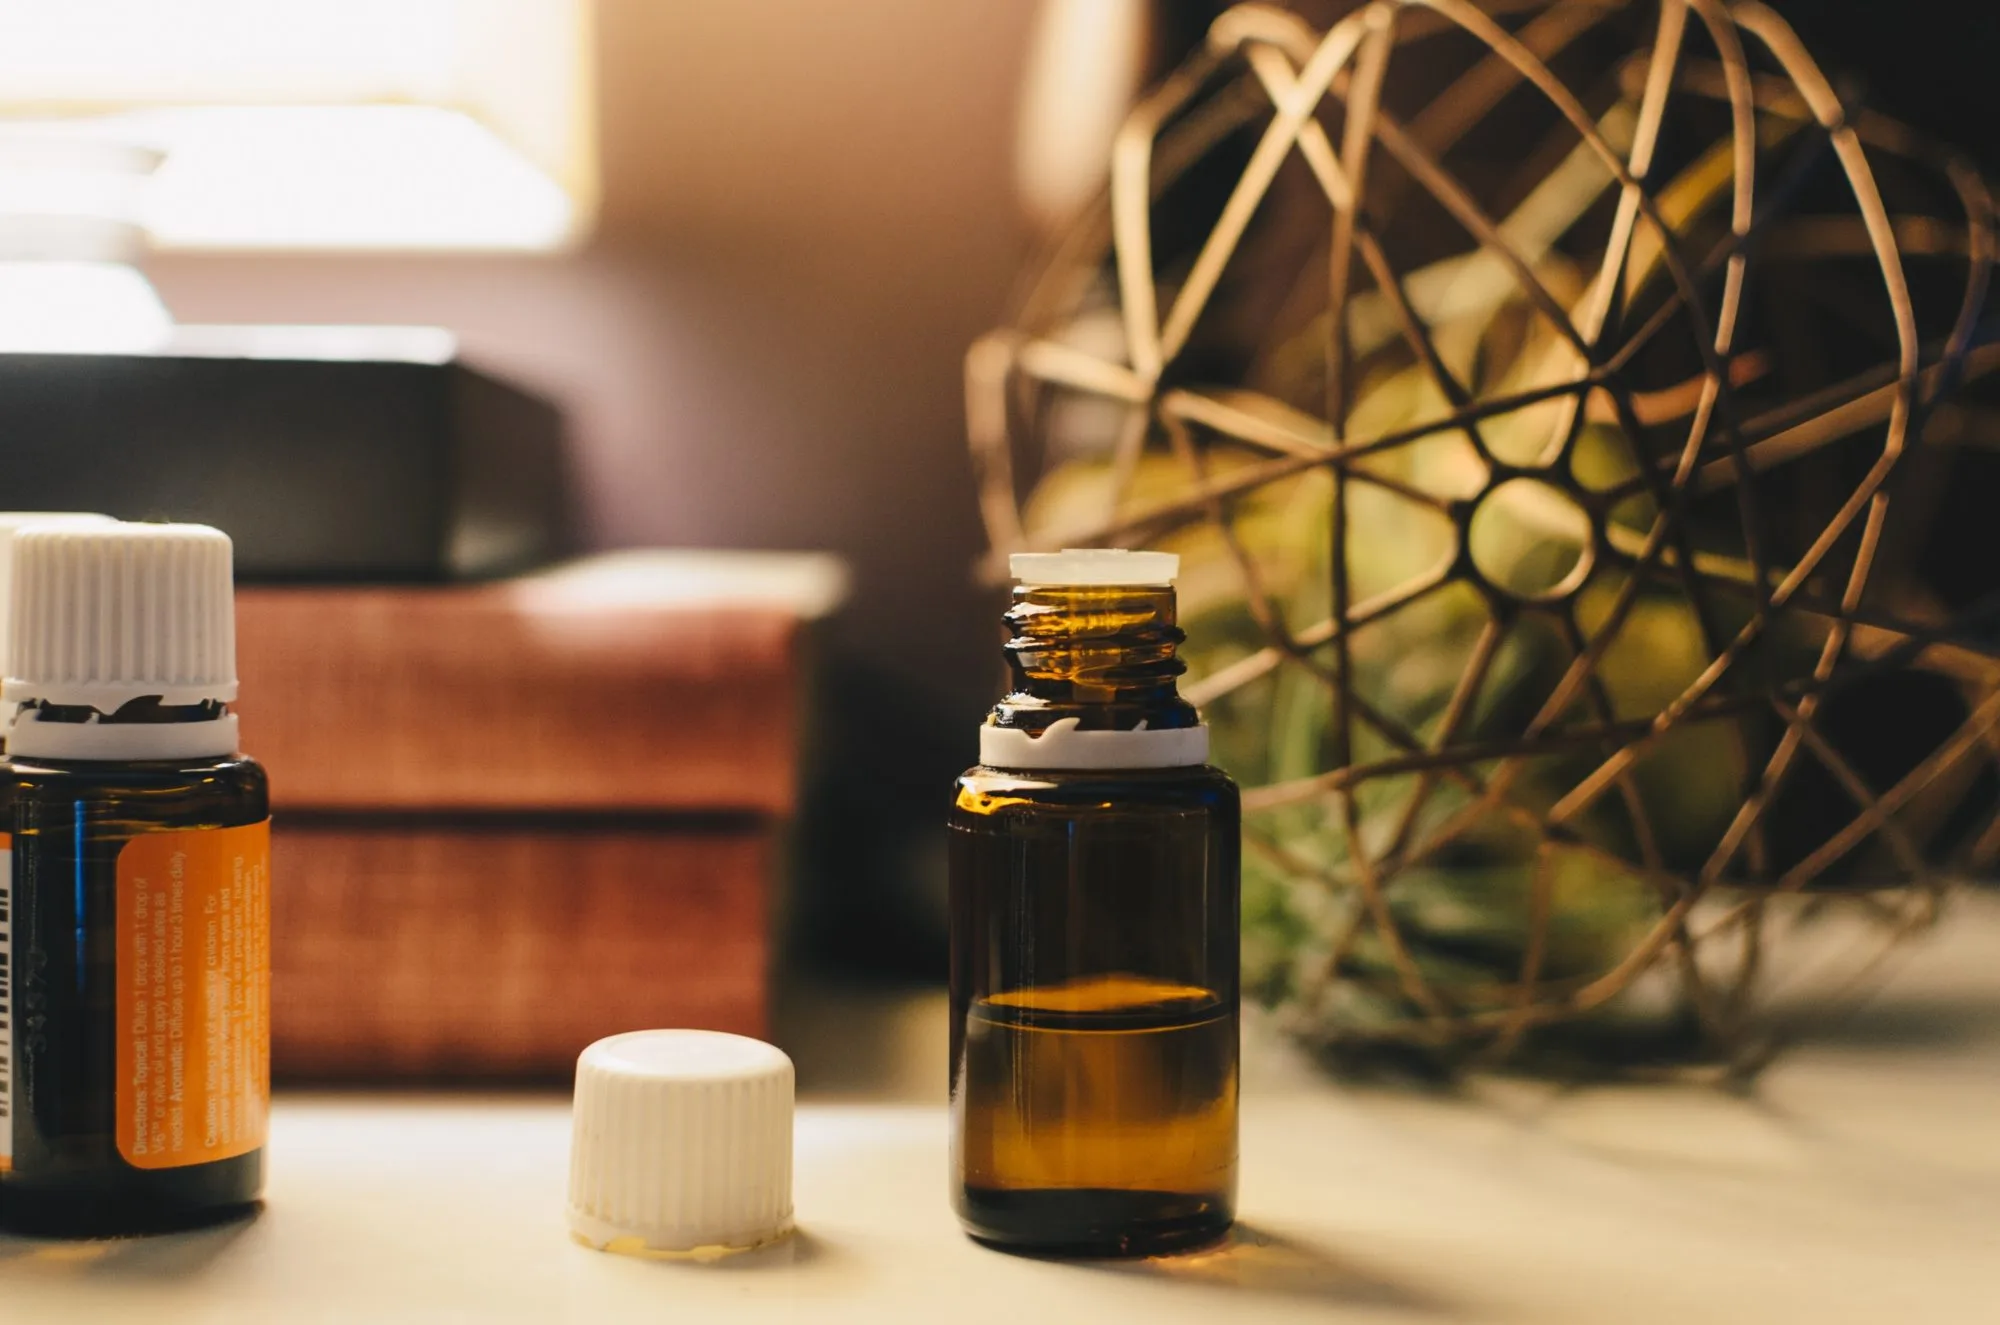 The Beginners’ Guide to Essential Oils: 11 Must-Haves